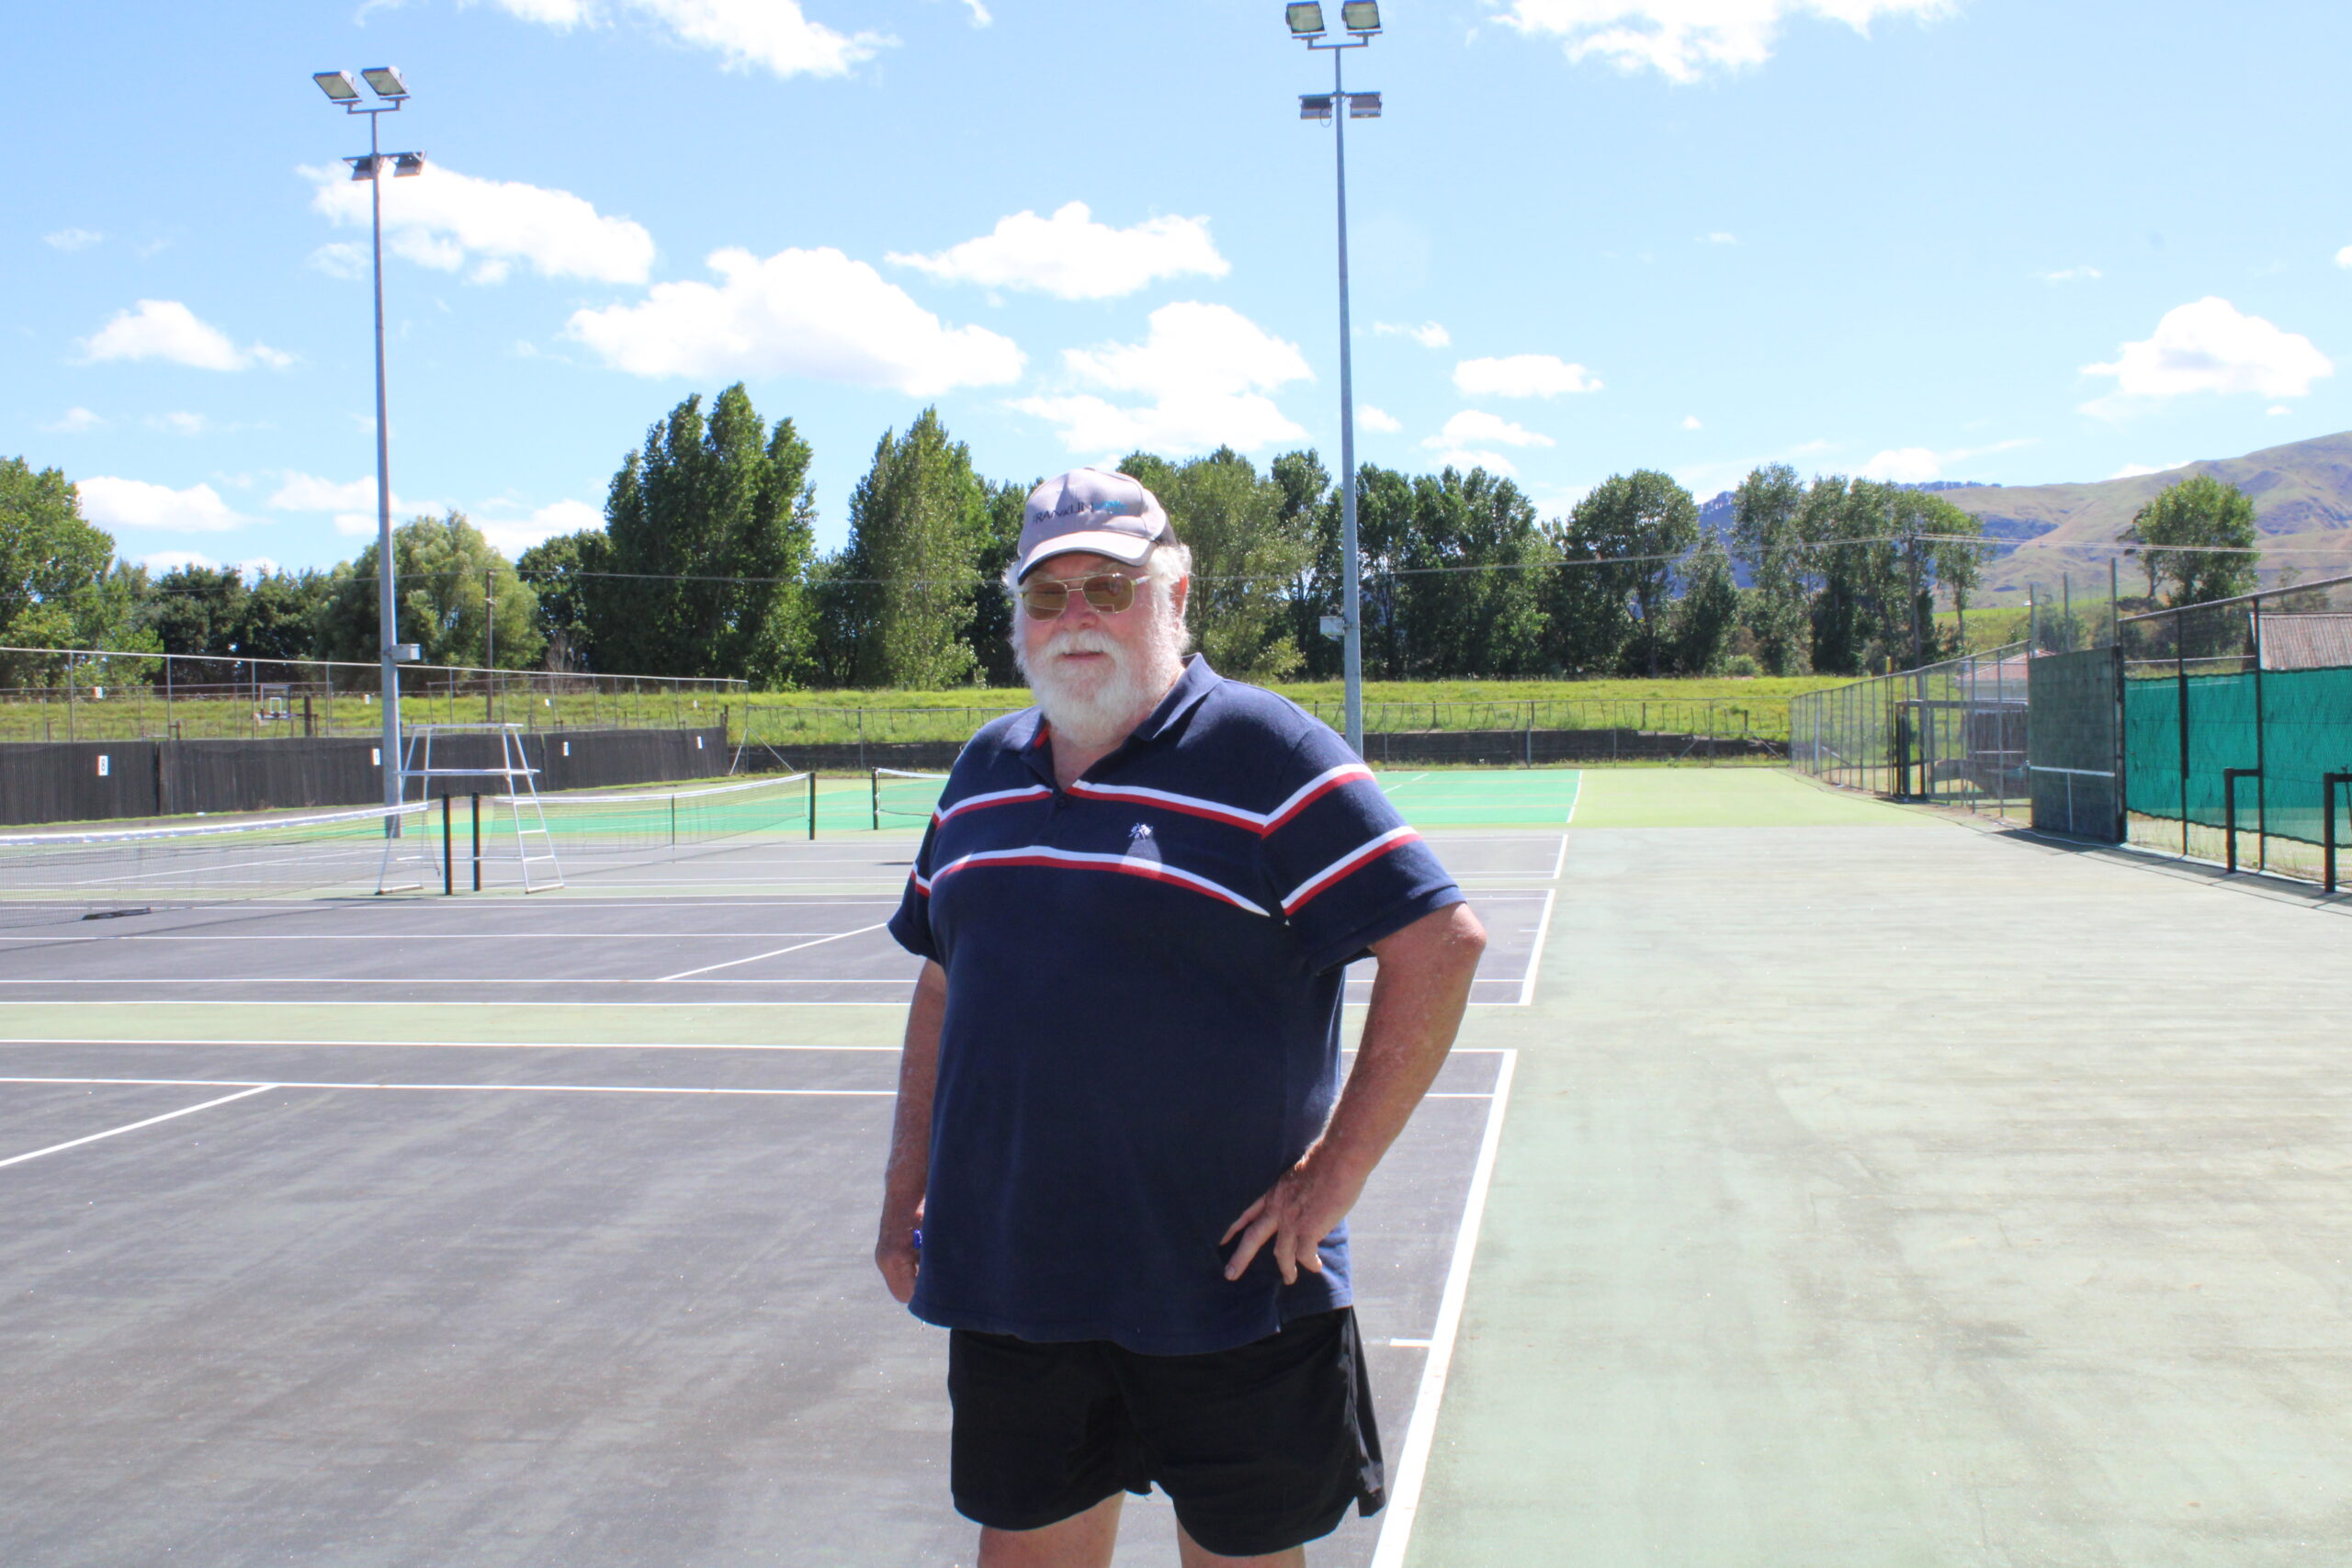 You are currently viewing 100-year milestone for Paeroa Tennis & Squash Club